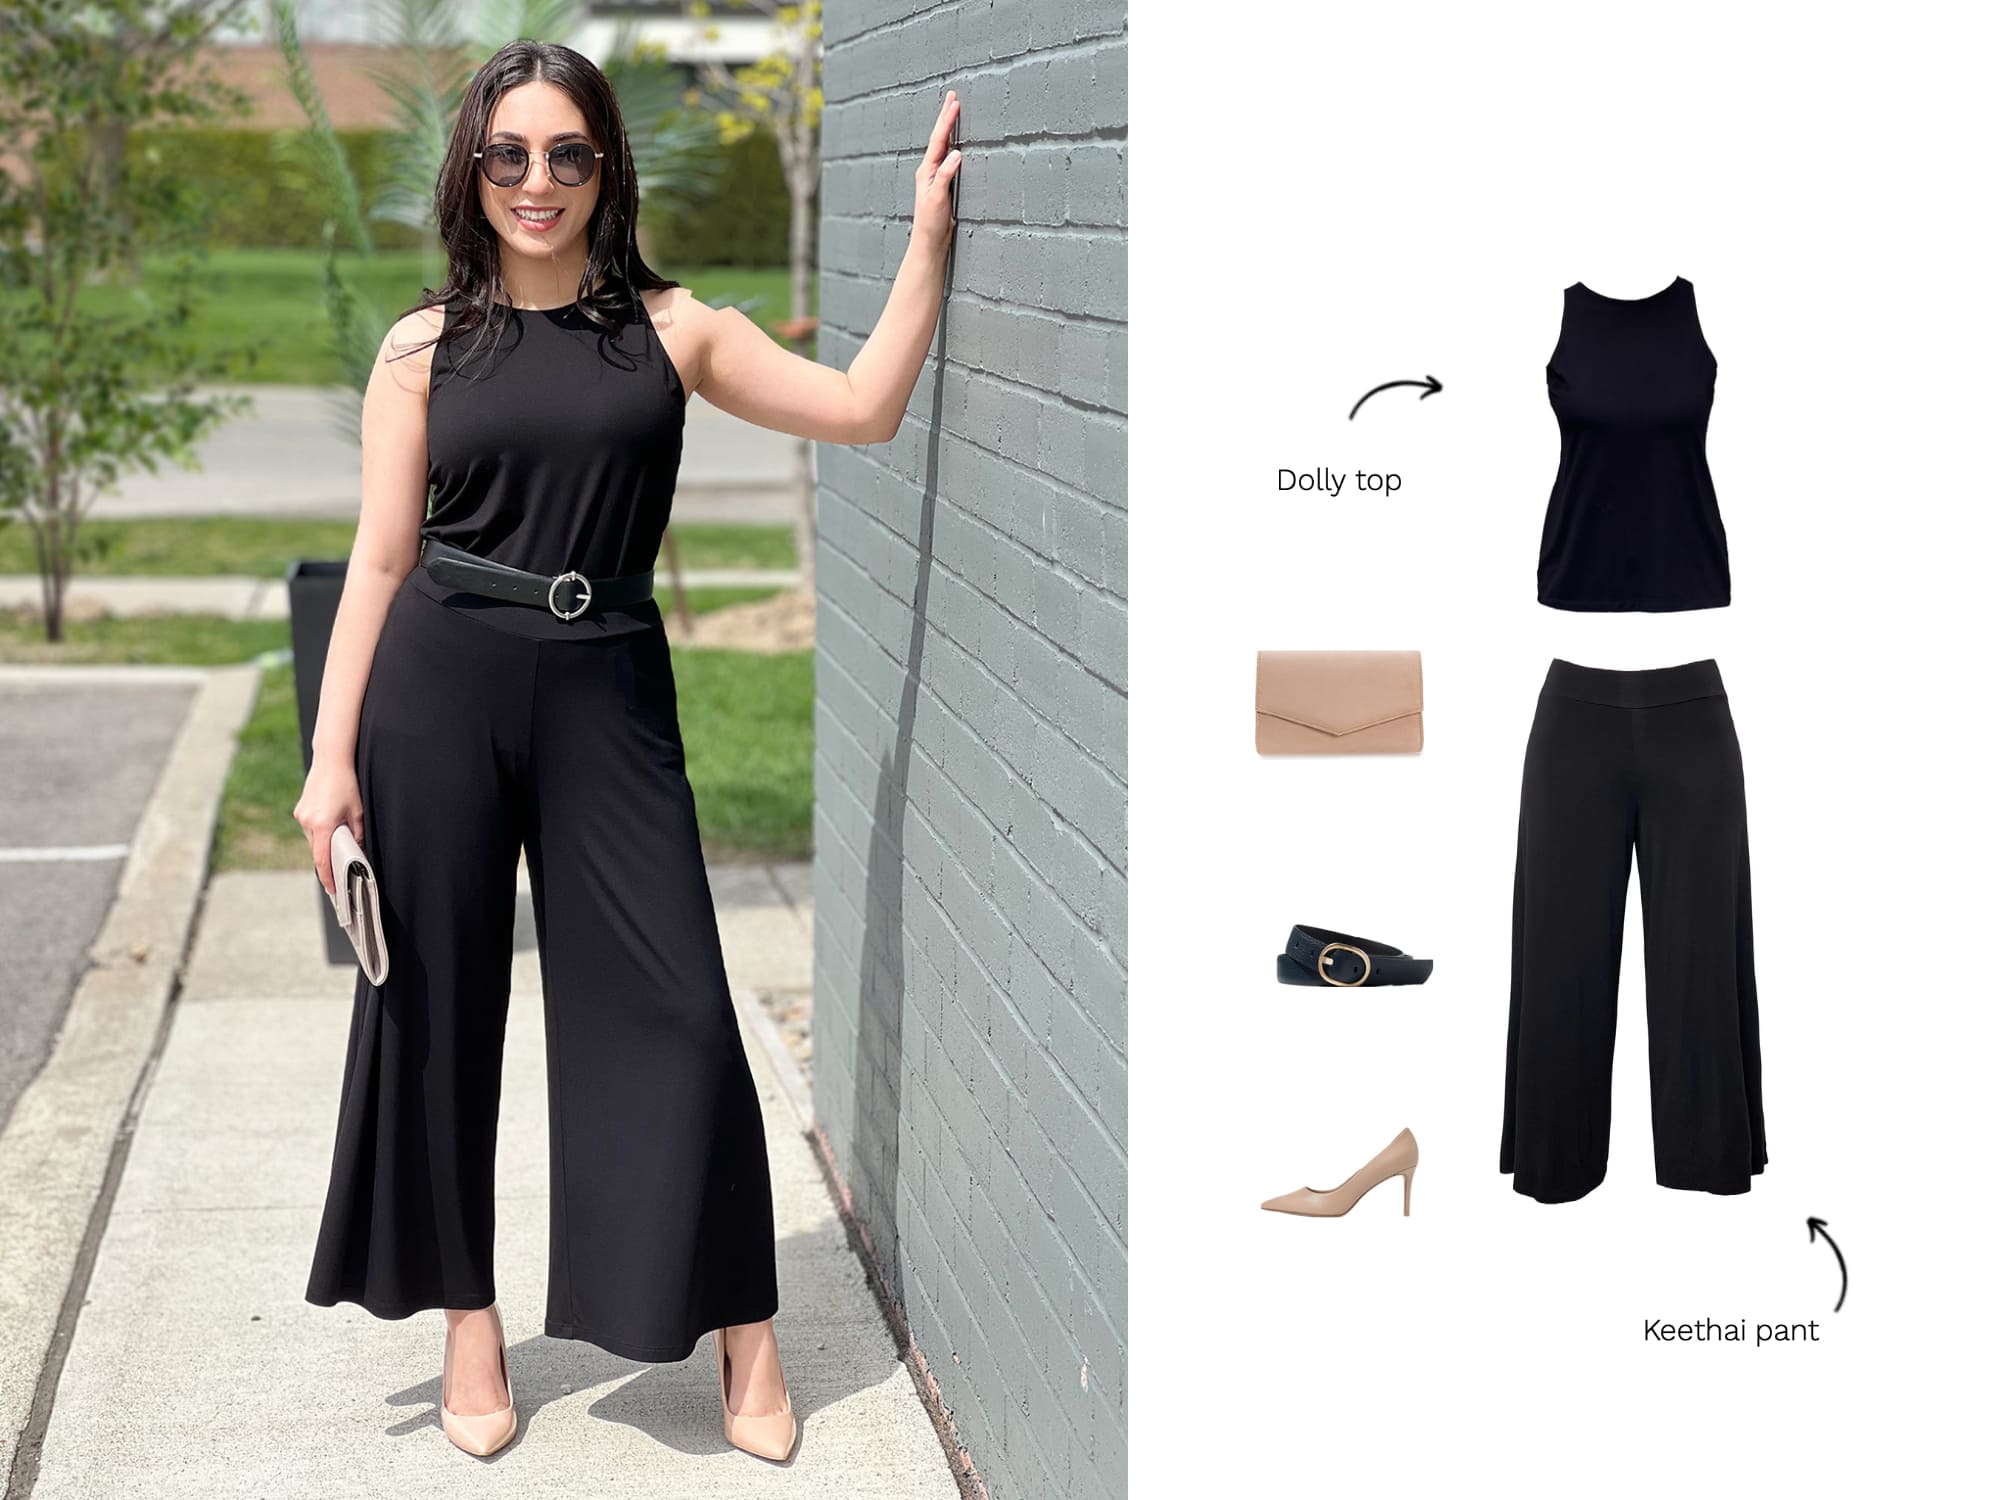 Top 10 wedding guest outfit ideas for over 40, Sustainable, Canadian made  clothing